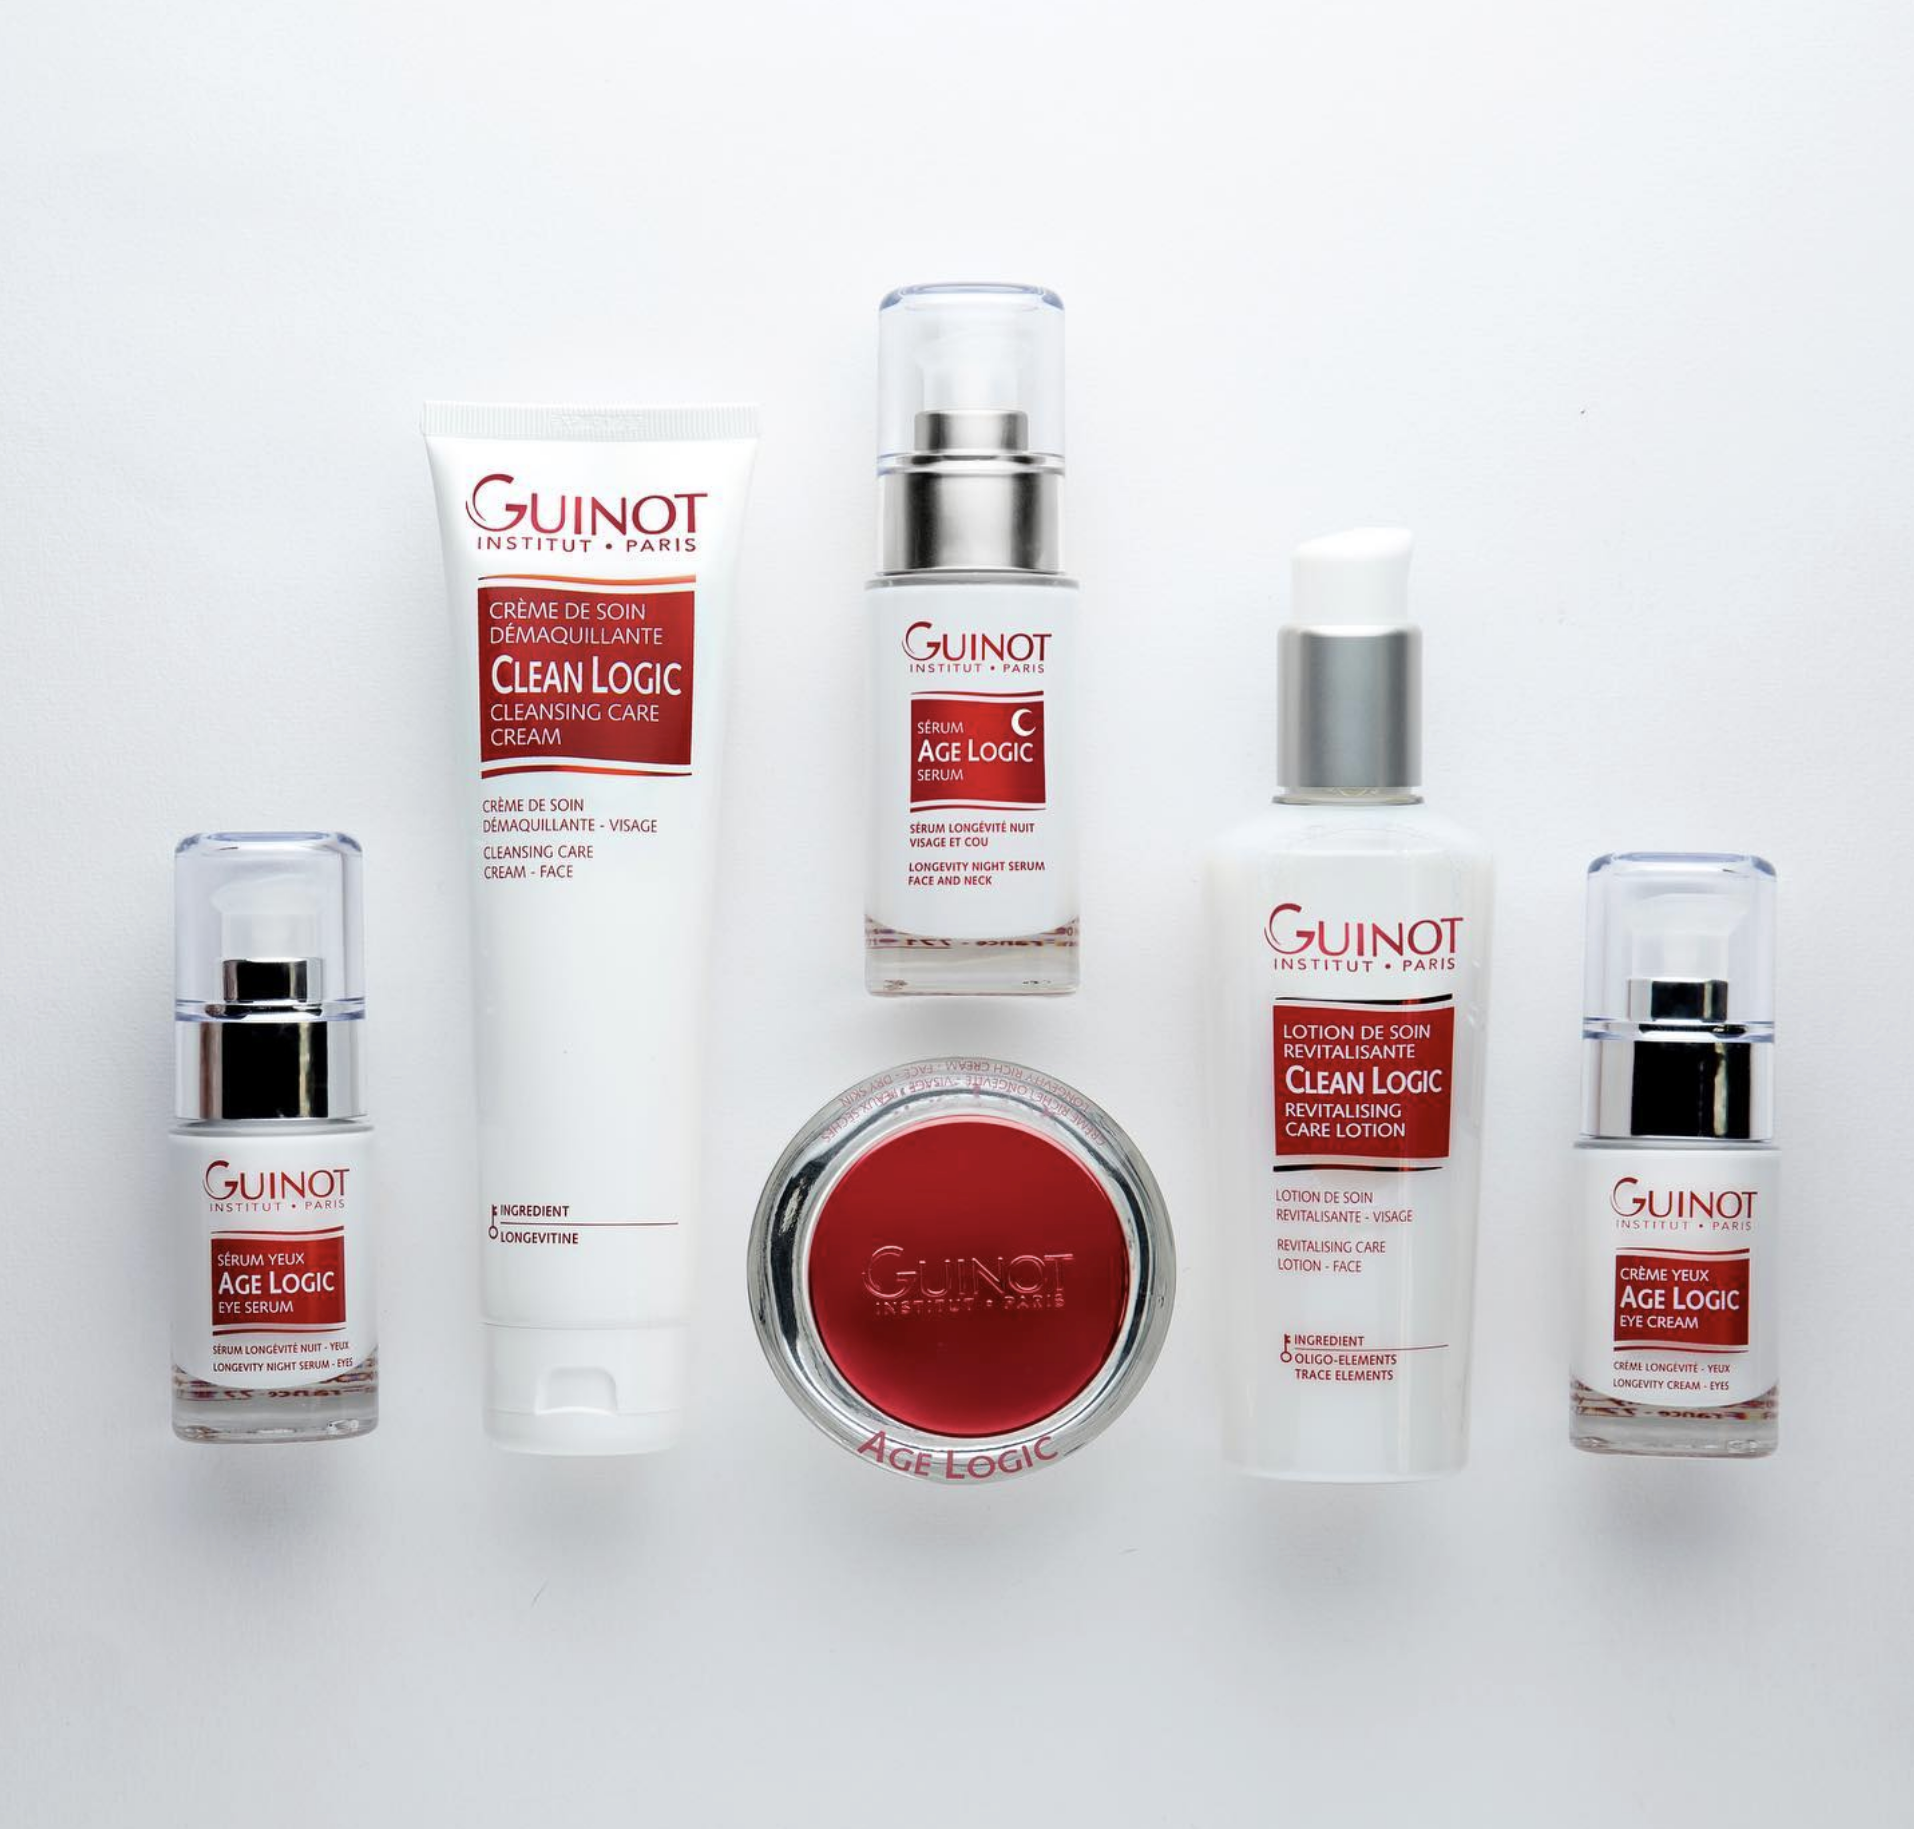 Guinot skincare products